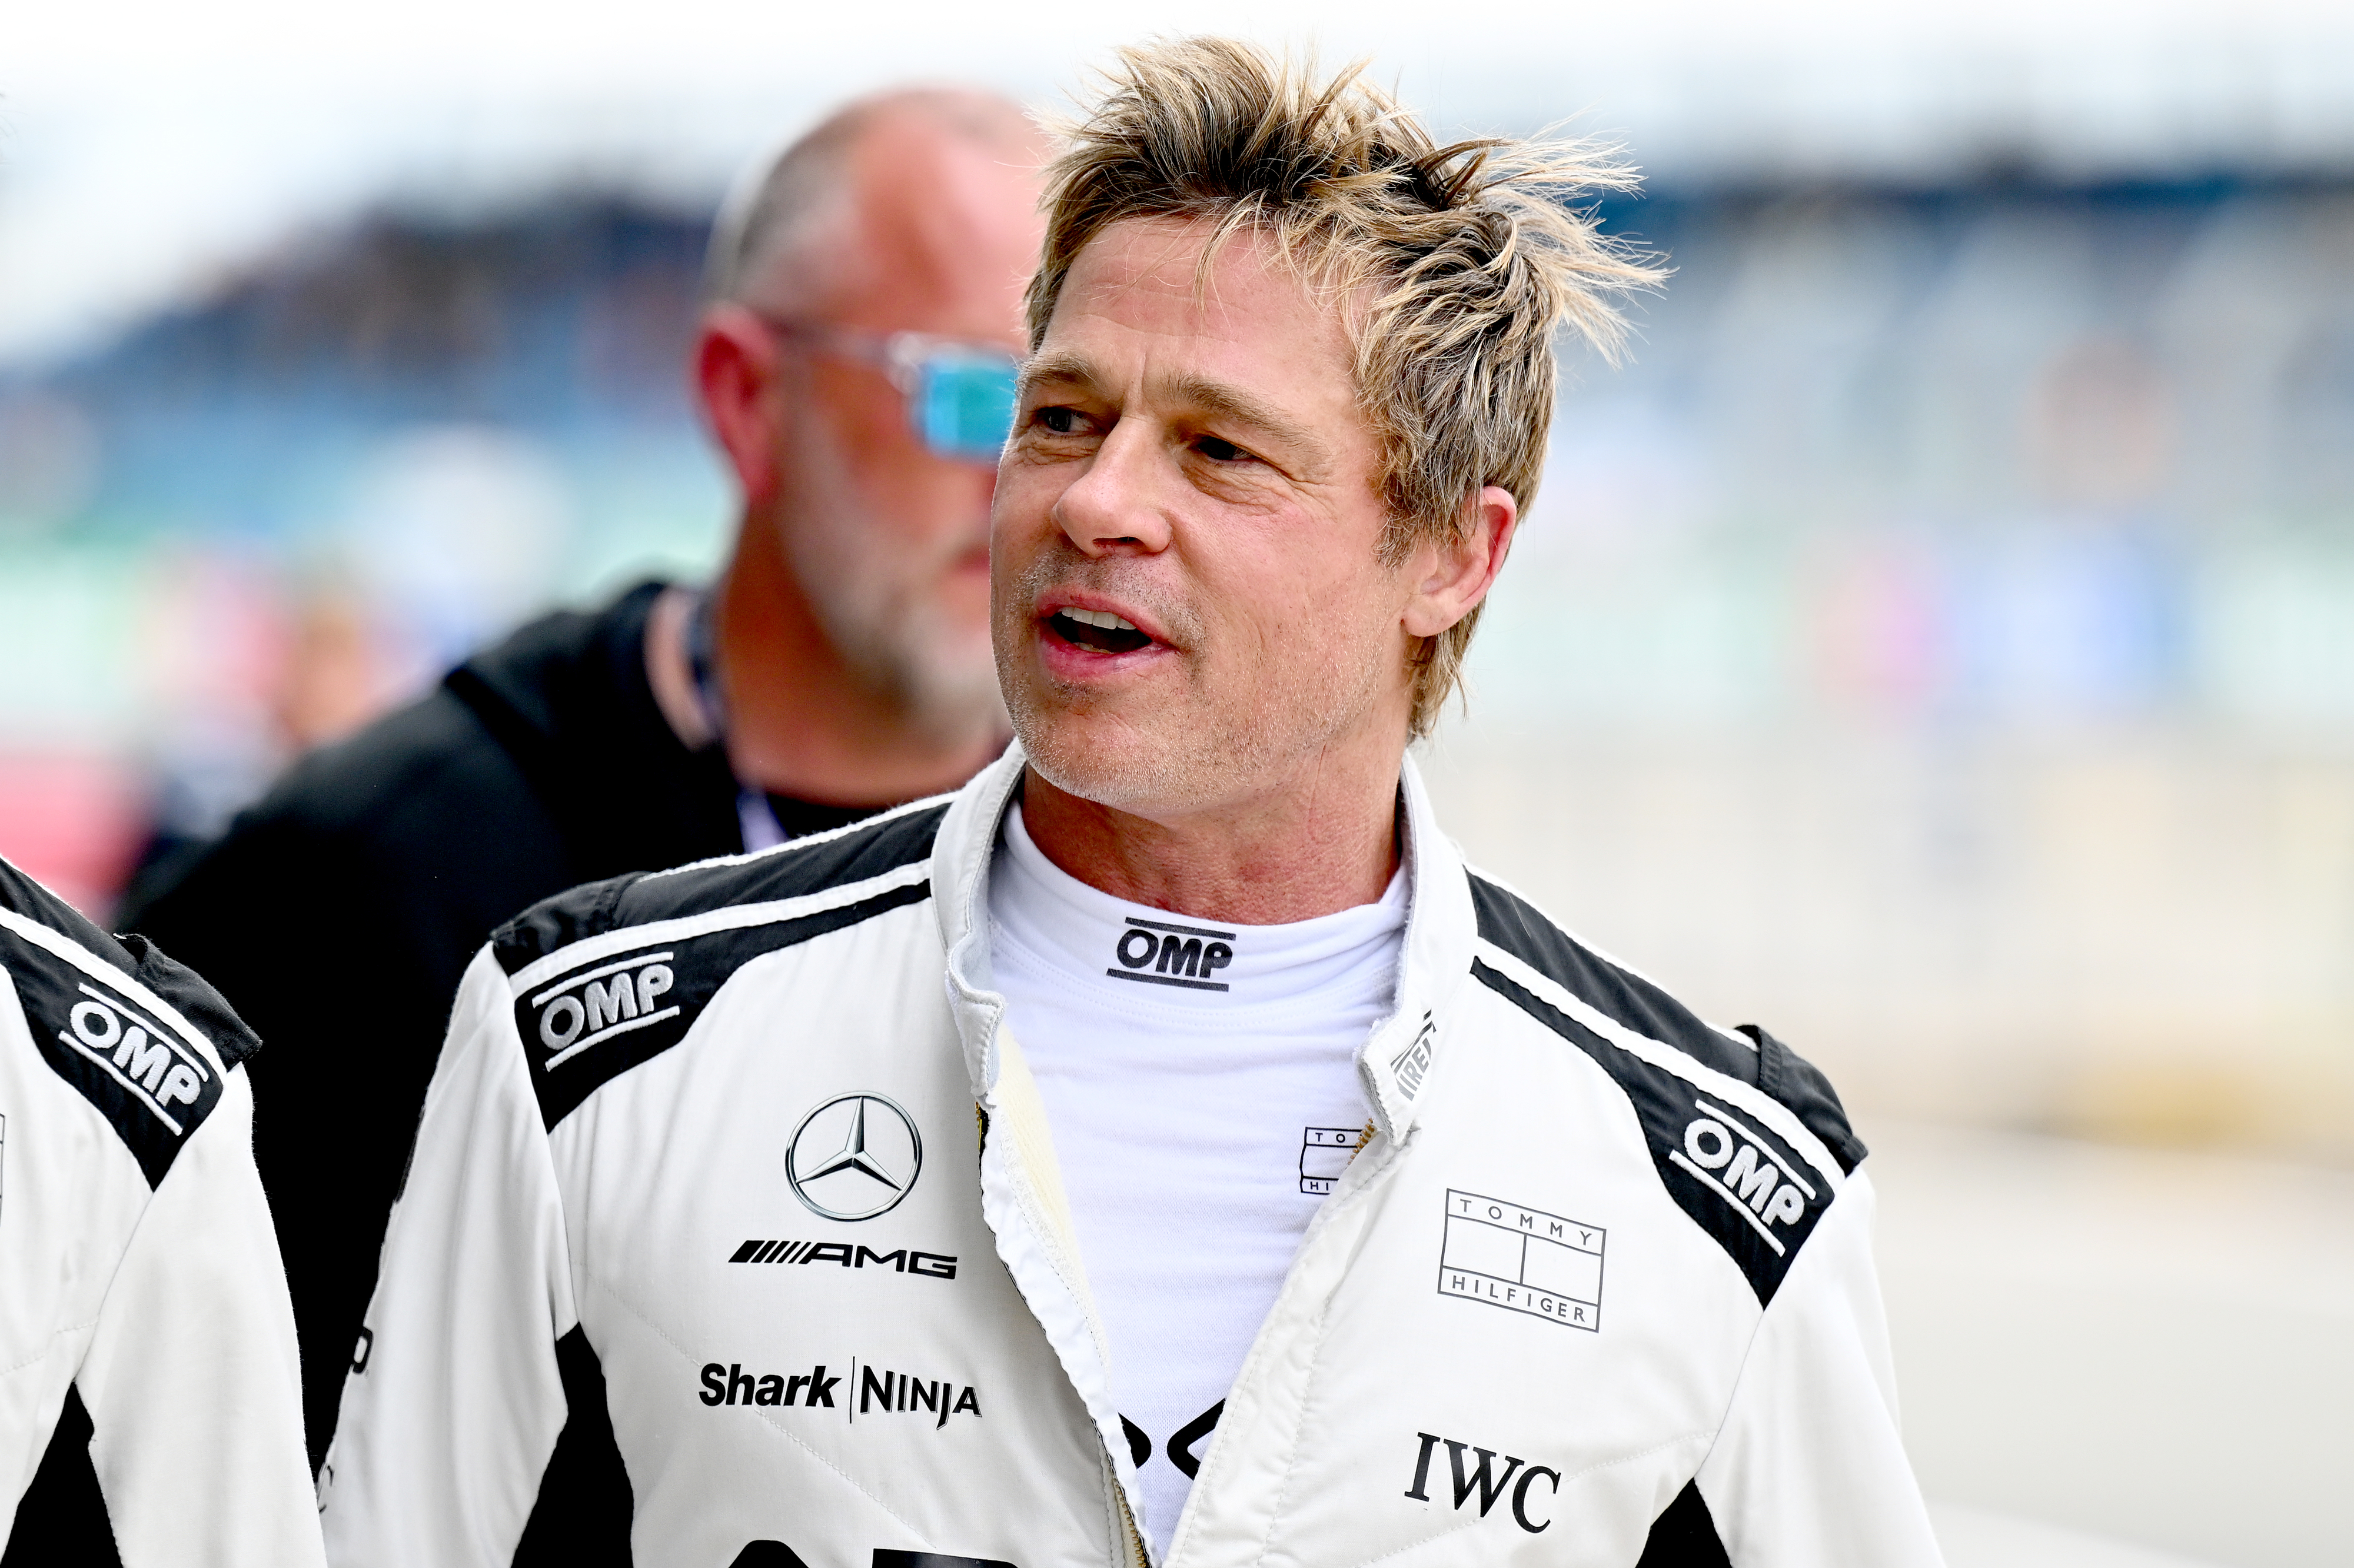 Brad Pitt in a white racing suit with logos,